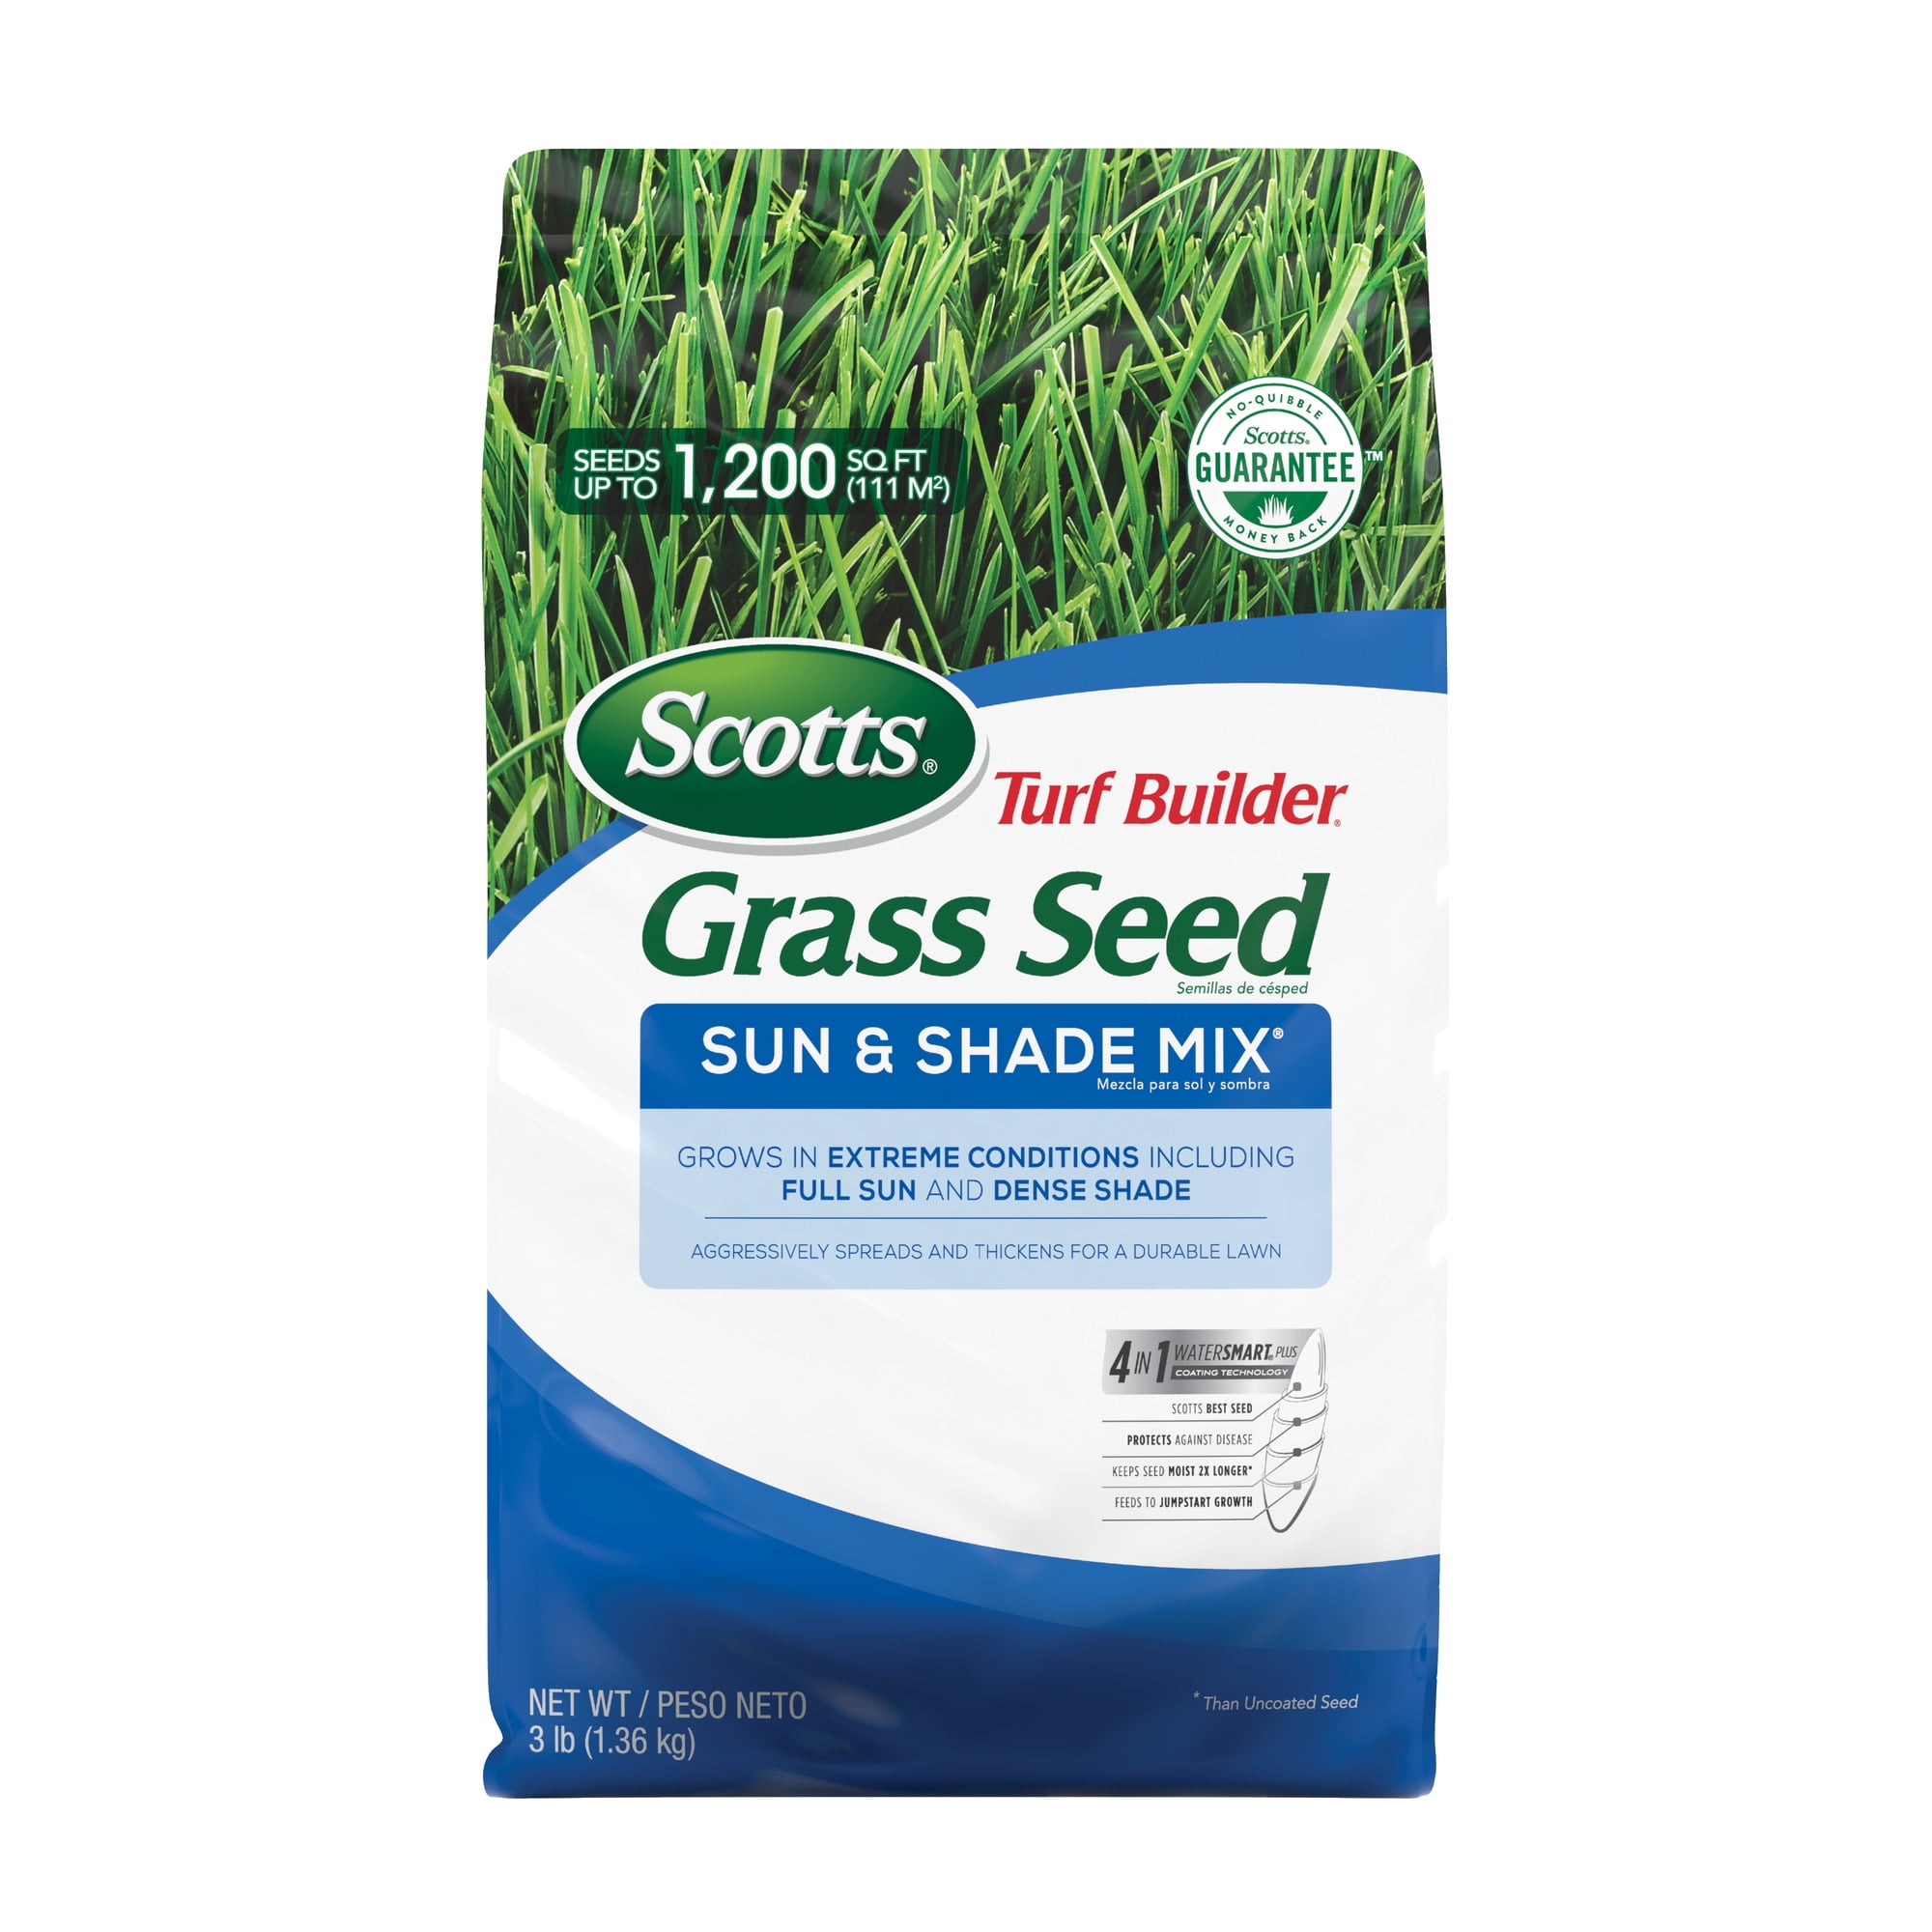 ft. Seeds Up to 1,000 sq Scotts Turf Builder Grass Seed Argentine Bahiagrass - Designed for Full Sun and Heat and Drought Resistance 2 Pack/5 LB 5 lb